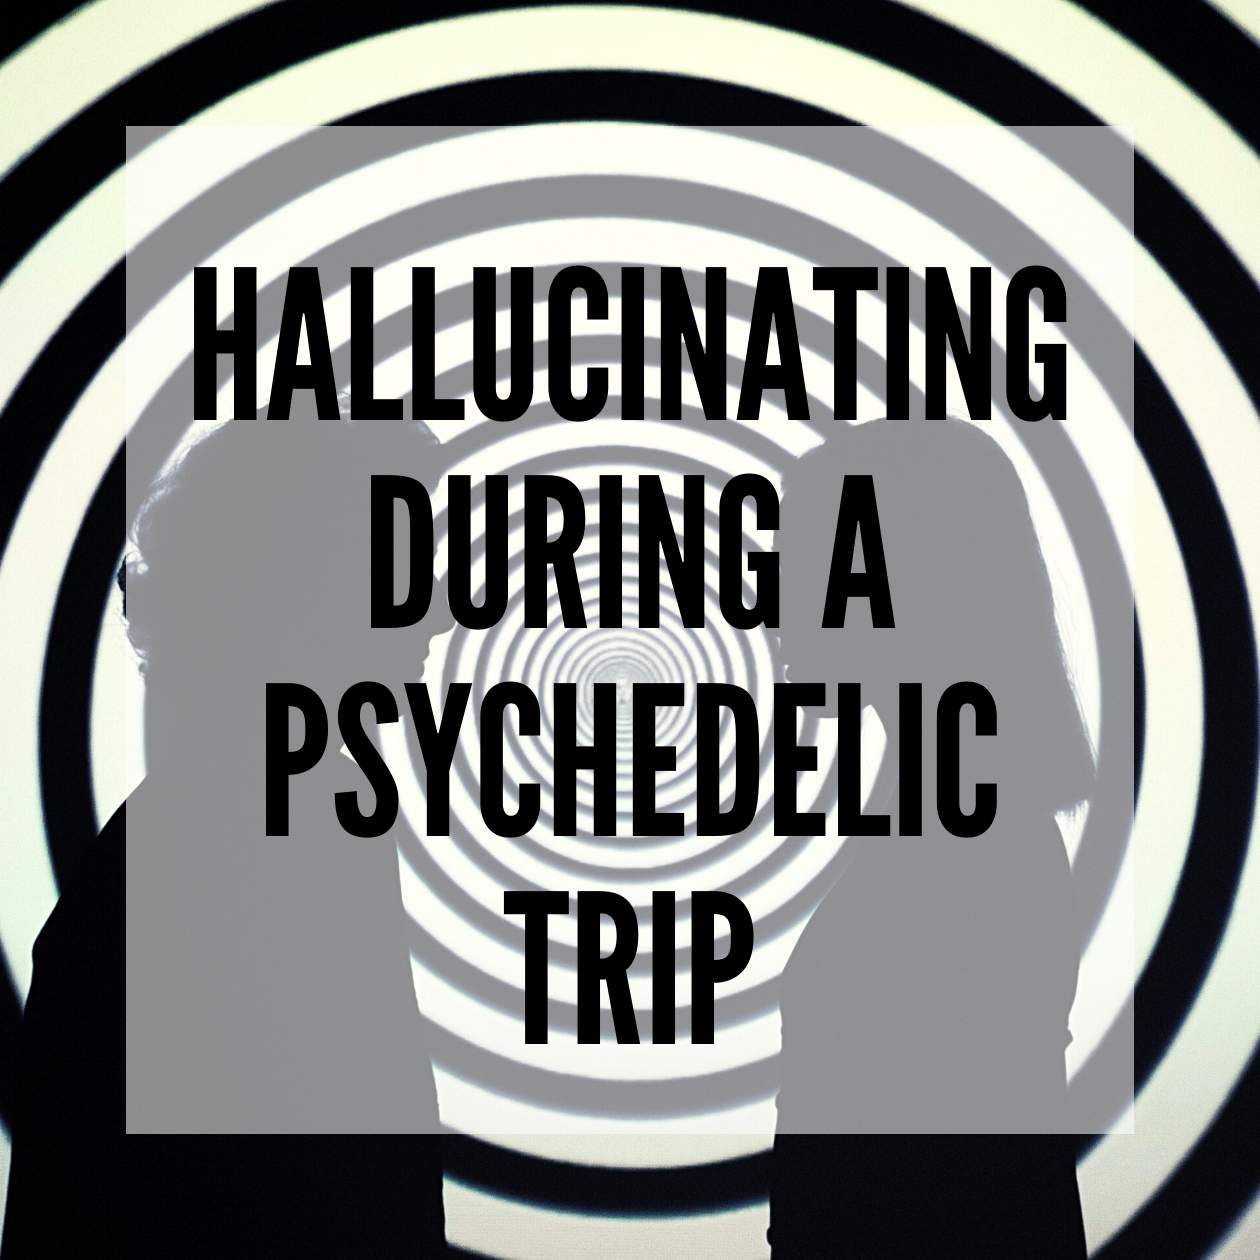 Hallucinating during a psychedelic trip blog thumbnail